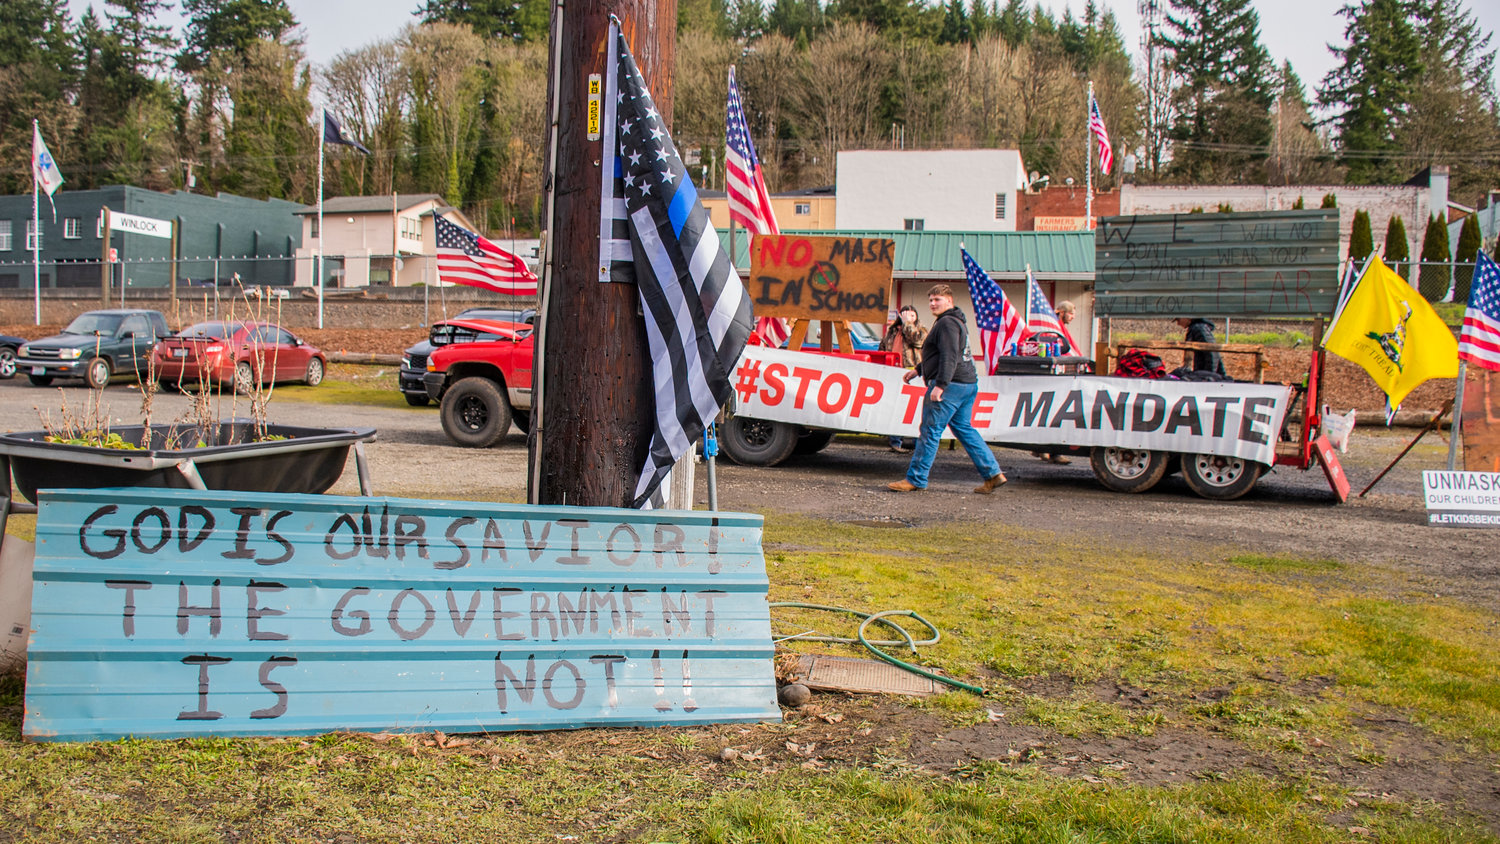 Signs written on sheet metal are displayed along Southwest Kerron Street in Winlock as students protest the mask mandate Tuesday afternoon.